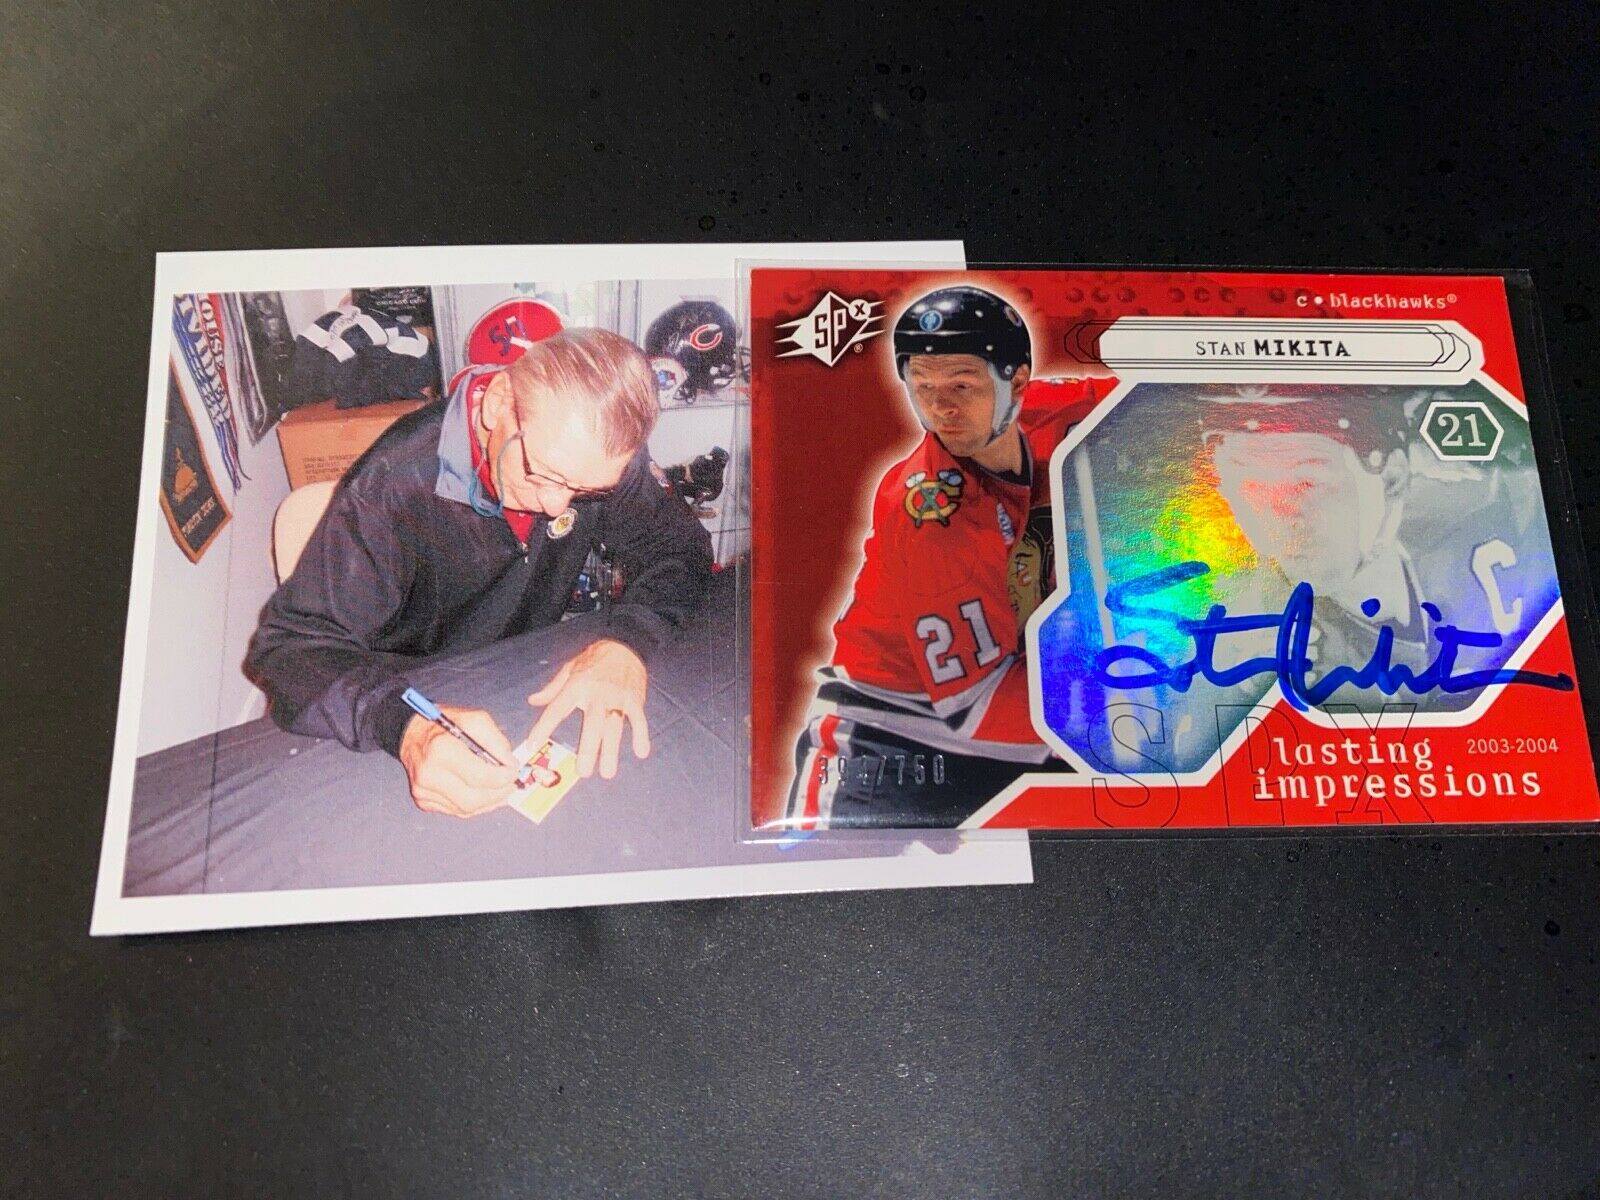 Stan Mikita Blackhawks Autographed Signed 2003-04 Upper Deck SPX Card Auto